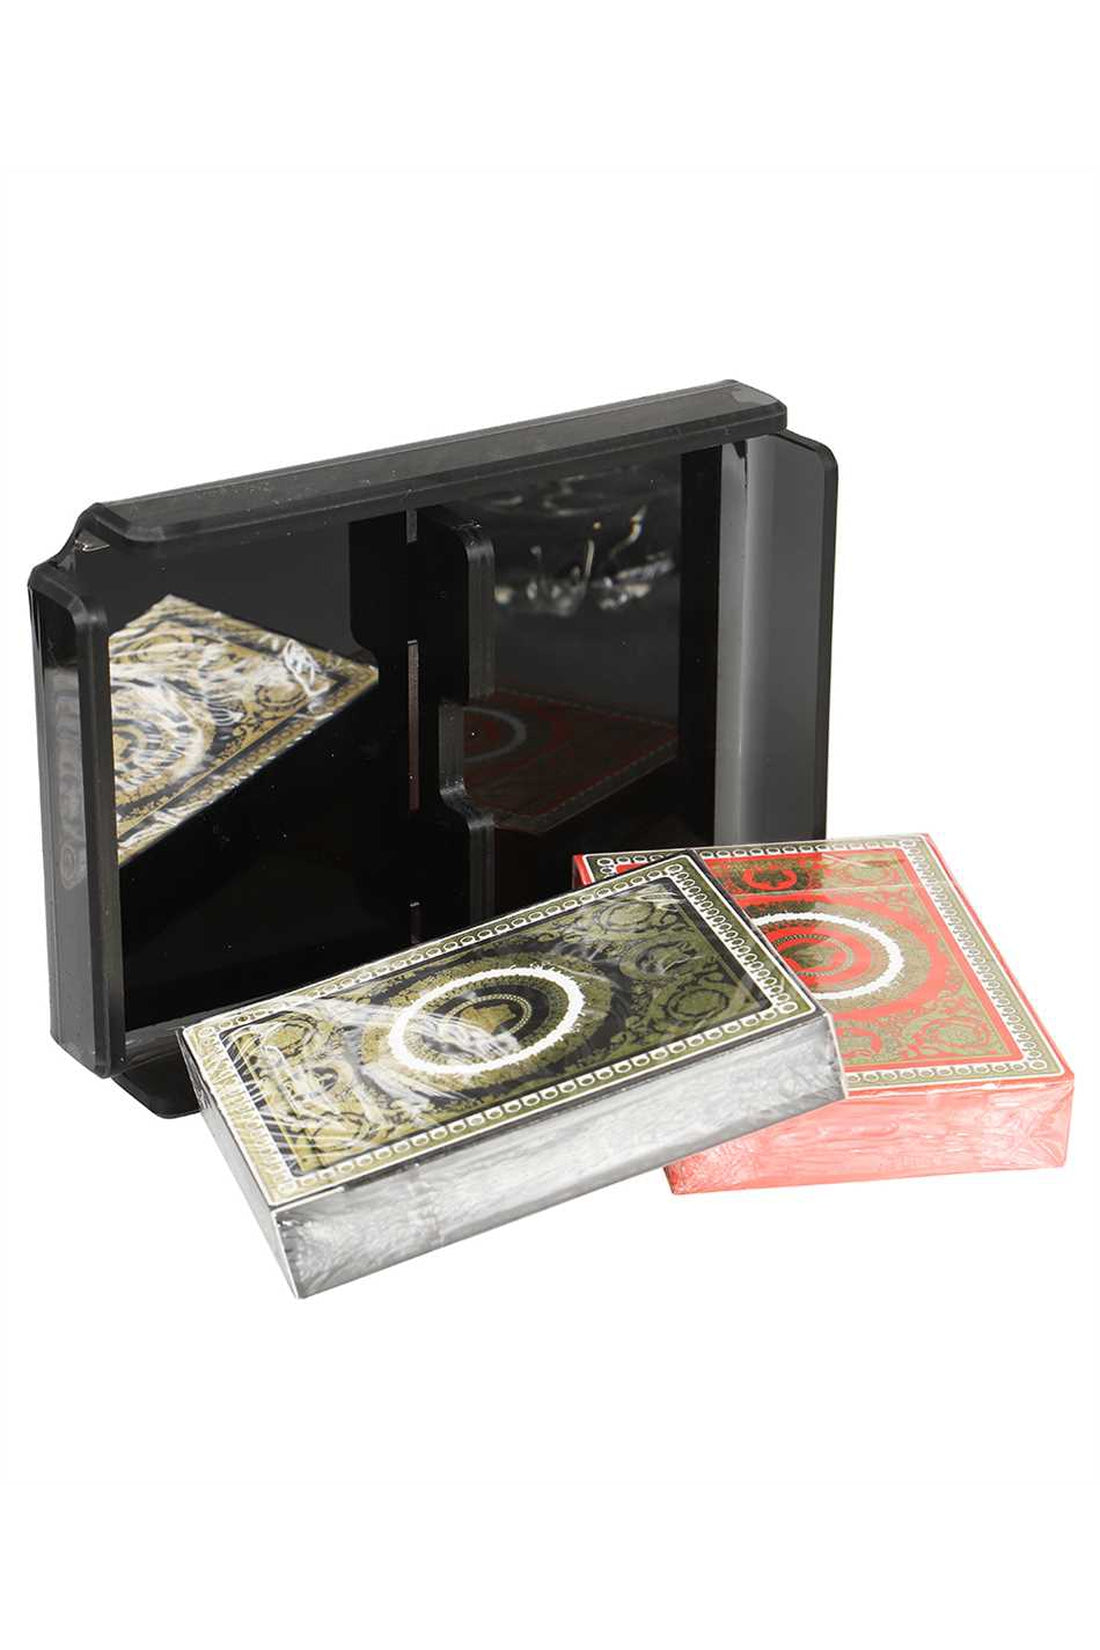 Versace-OUTLET-SALE-Barocco playing cards-ARCHIVIST